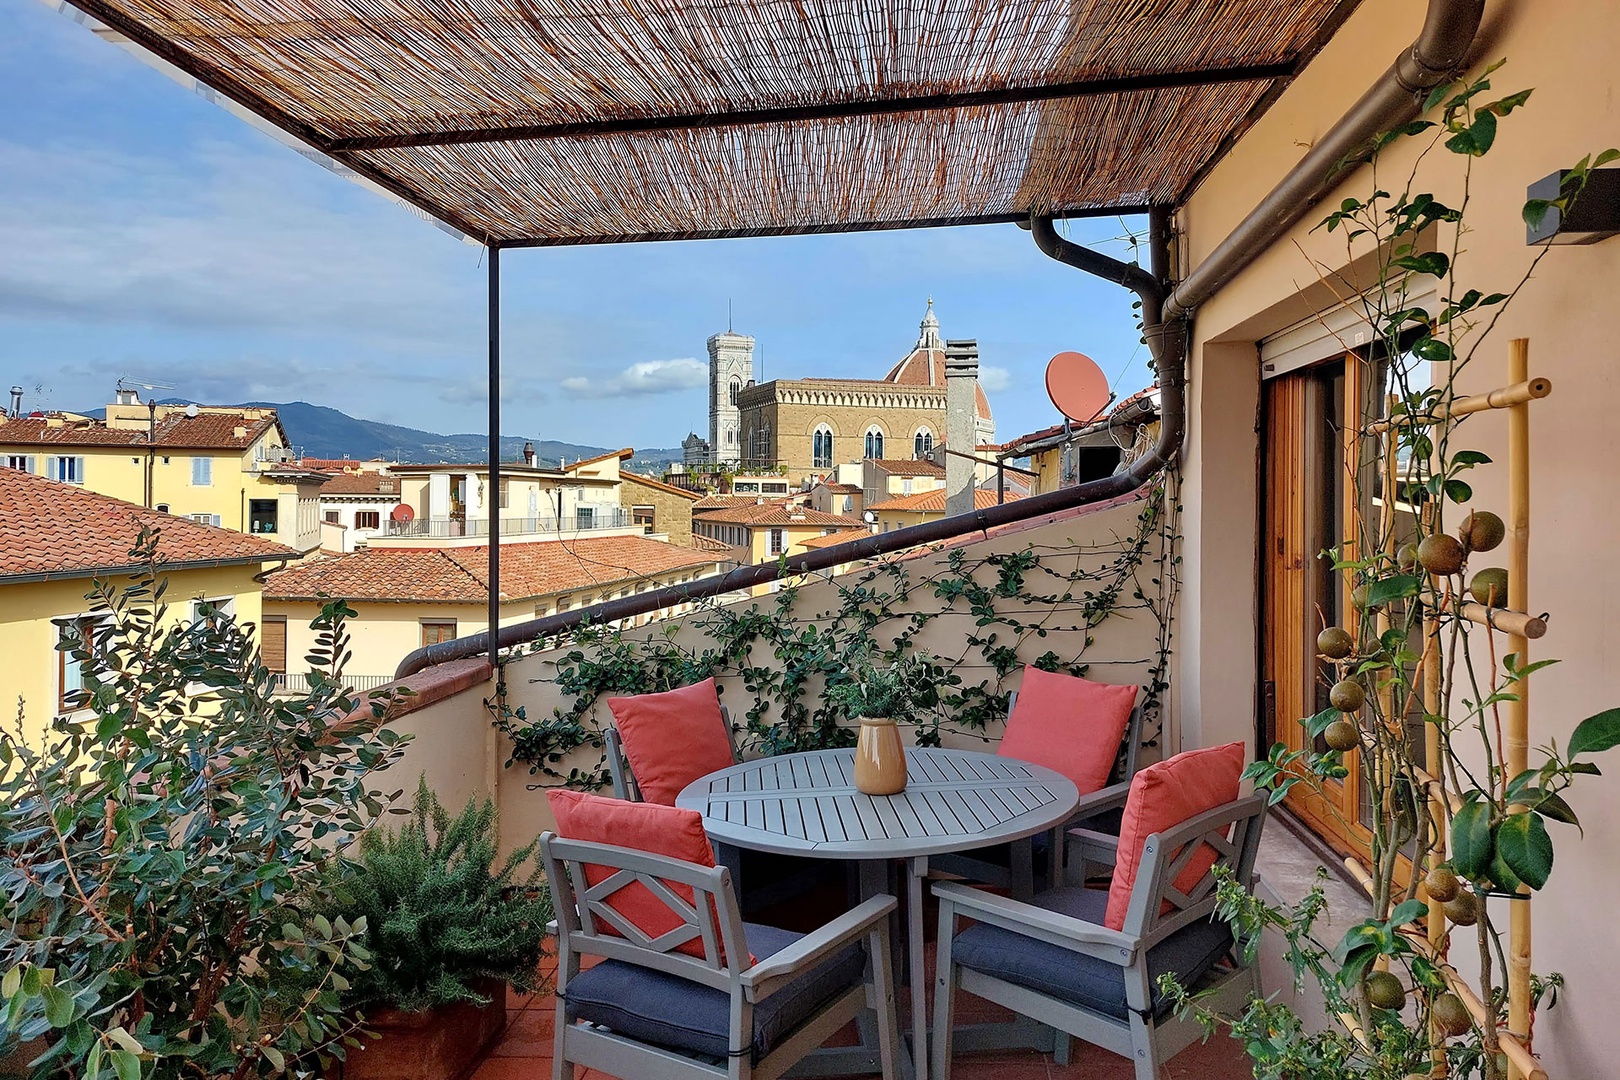 Enjoy views of the Duomo at the picturesque Amore apartment.